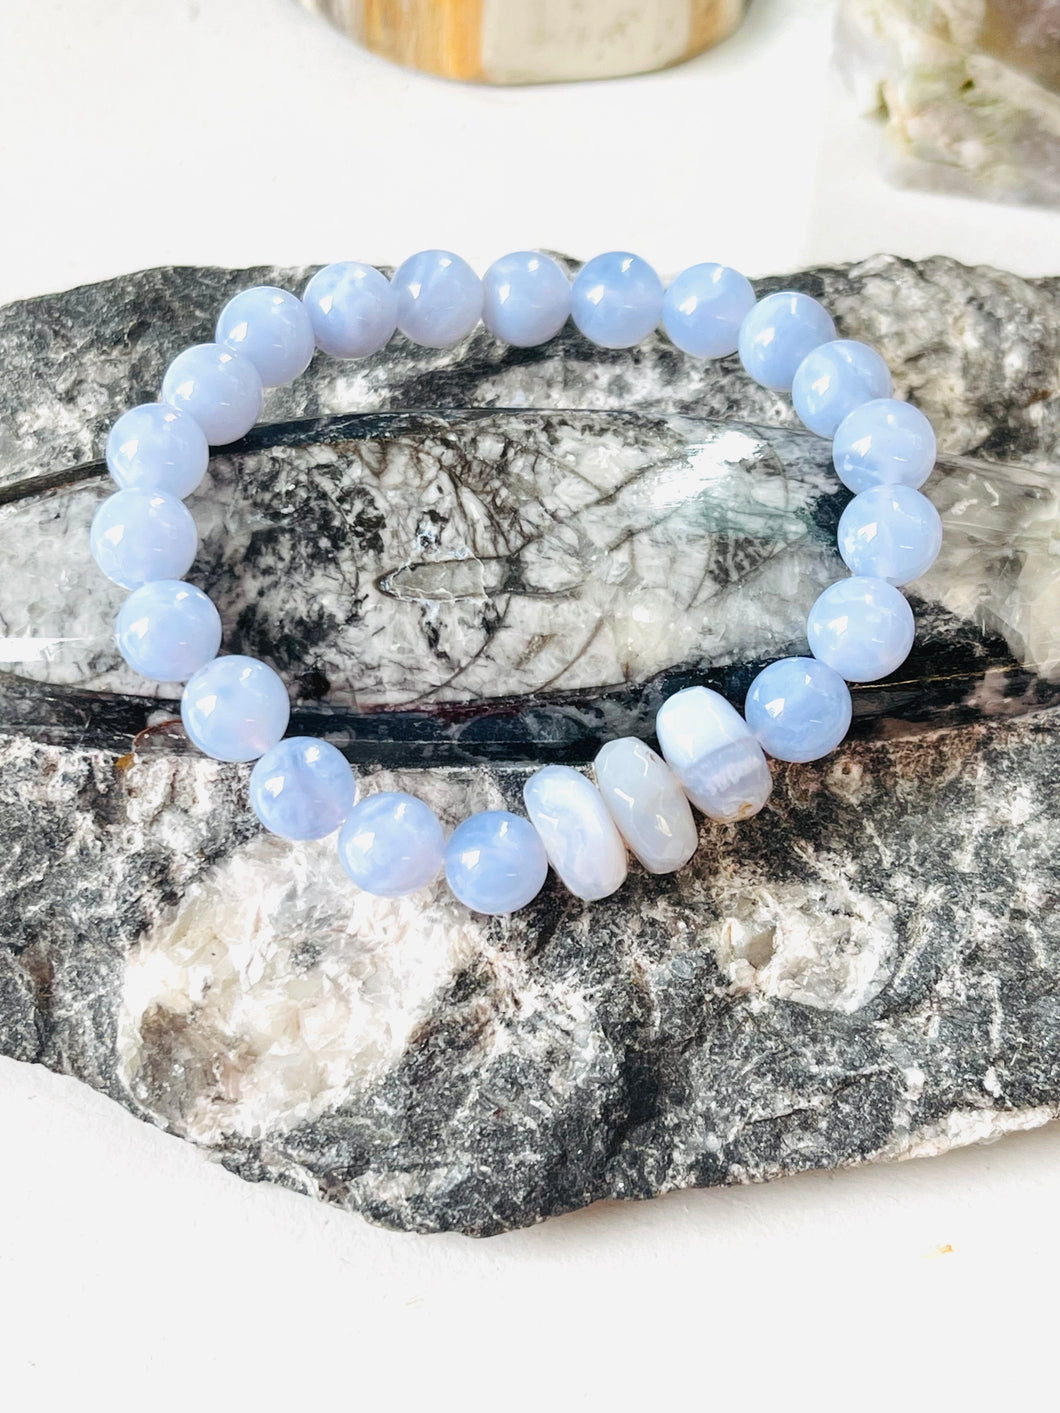 Bracelet with blue lace Agate beads